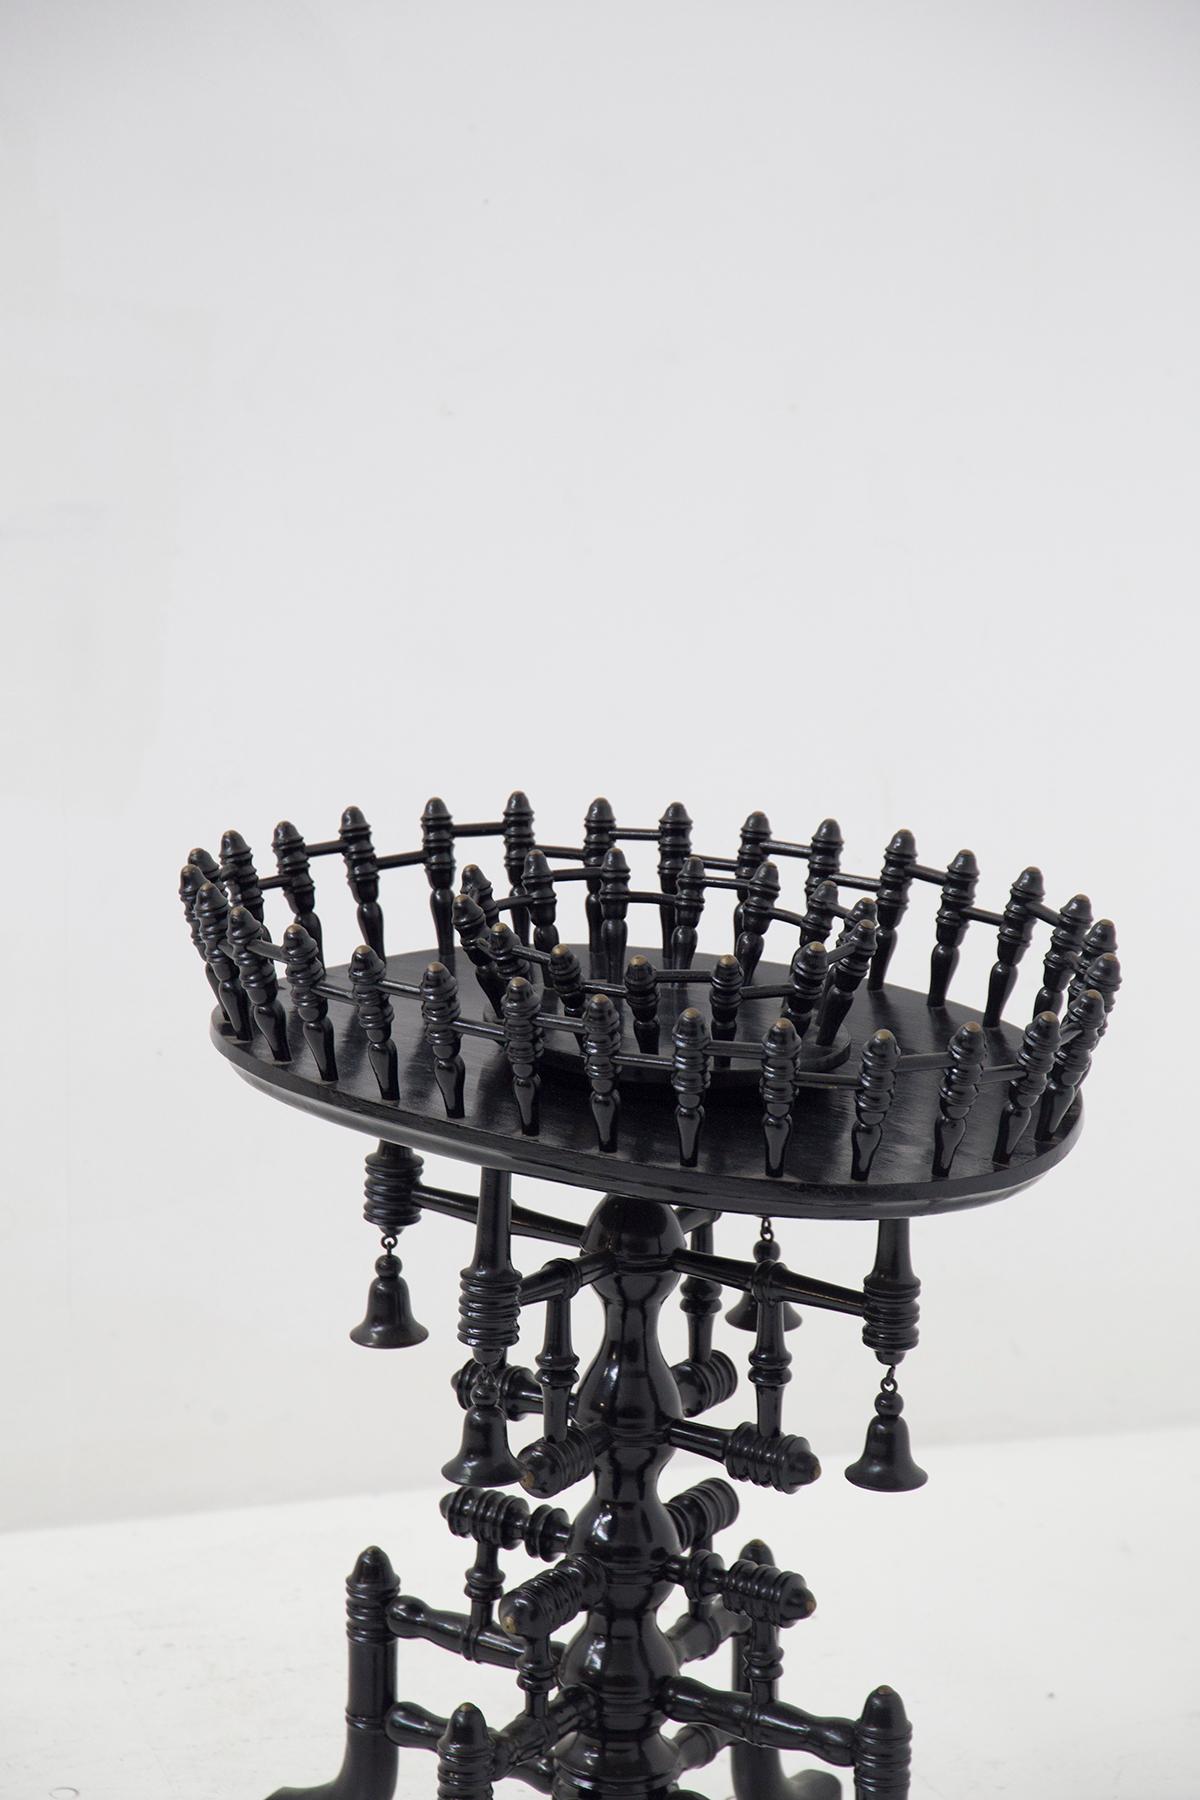 A very special ebonized wooden coffee table from 19th-century Germany, fine German manufacture.
The table is entirely made of finely ebonized, turned wood.
At the base there is a very sinuous central trunk, in fact it seems to be made up of many